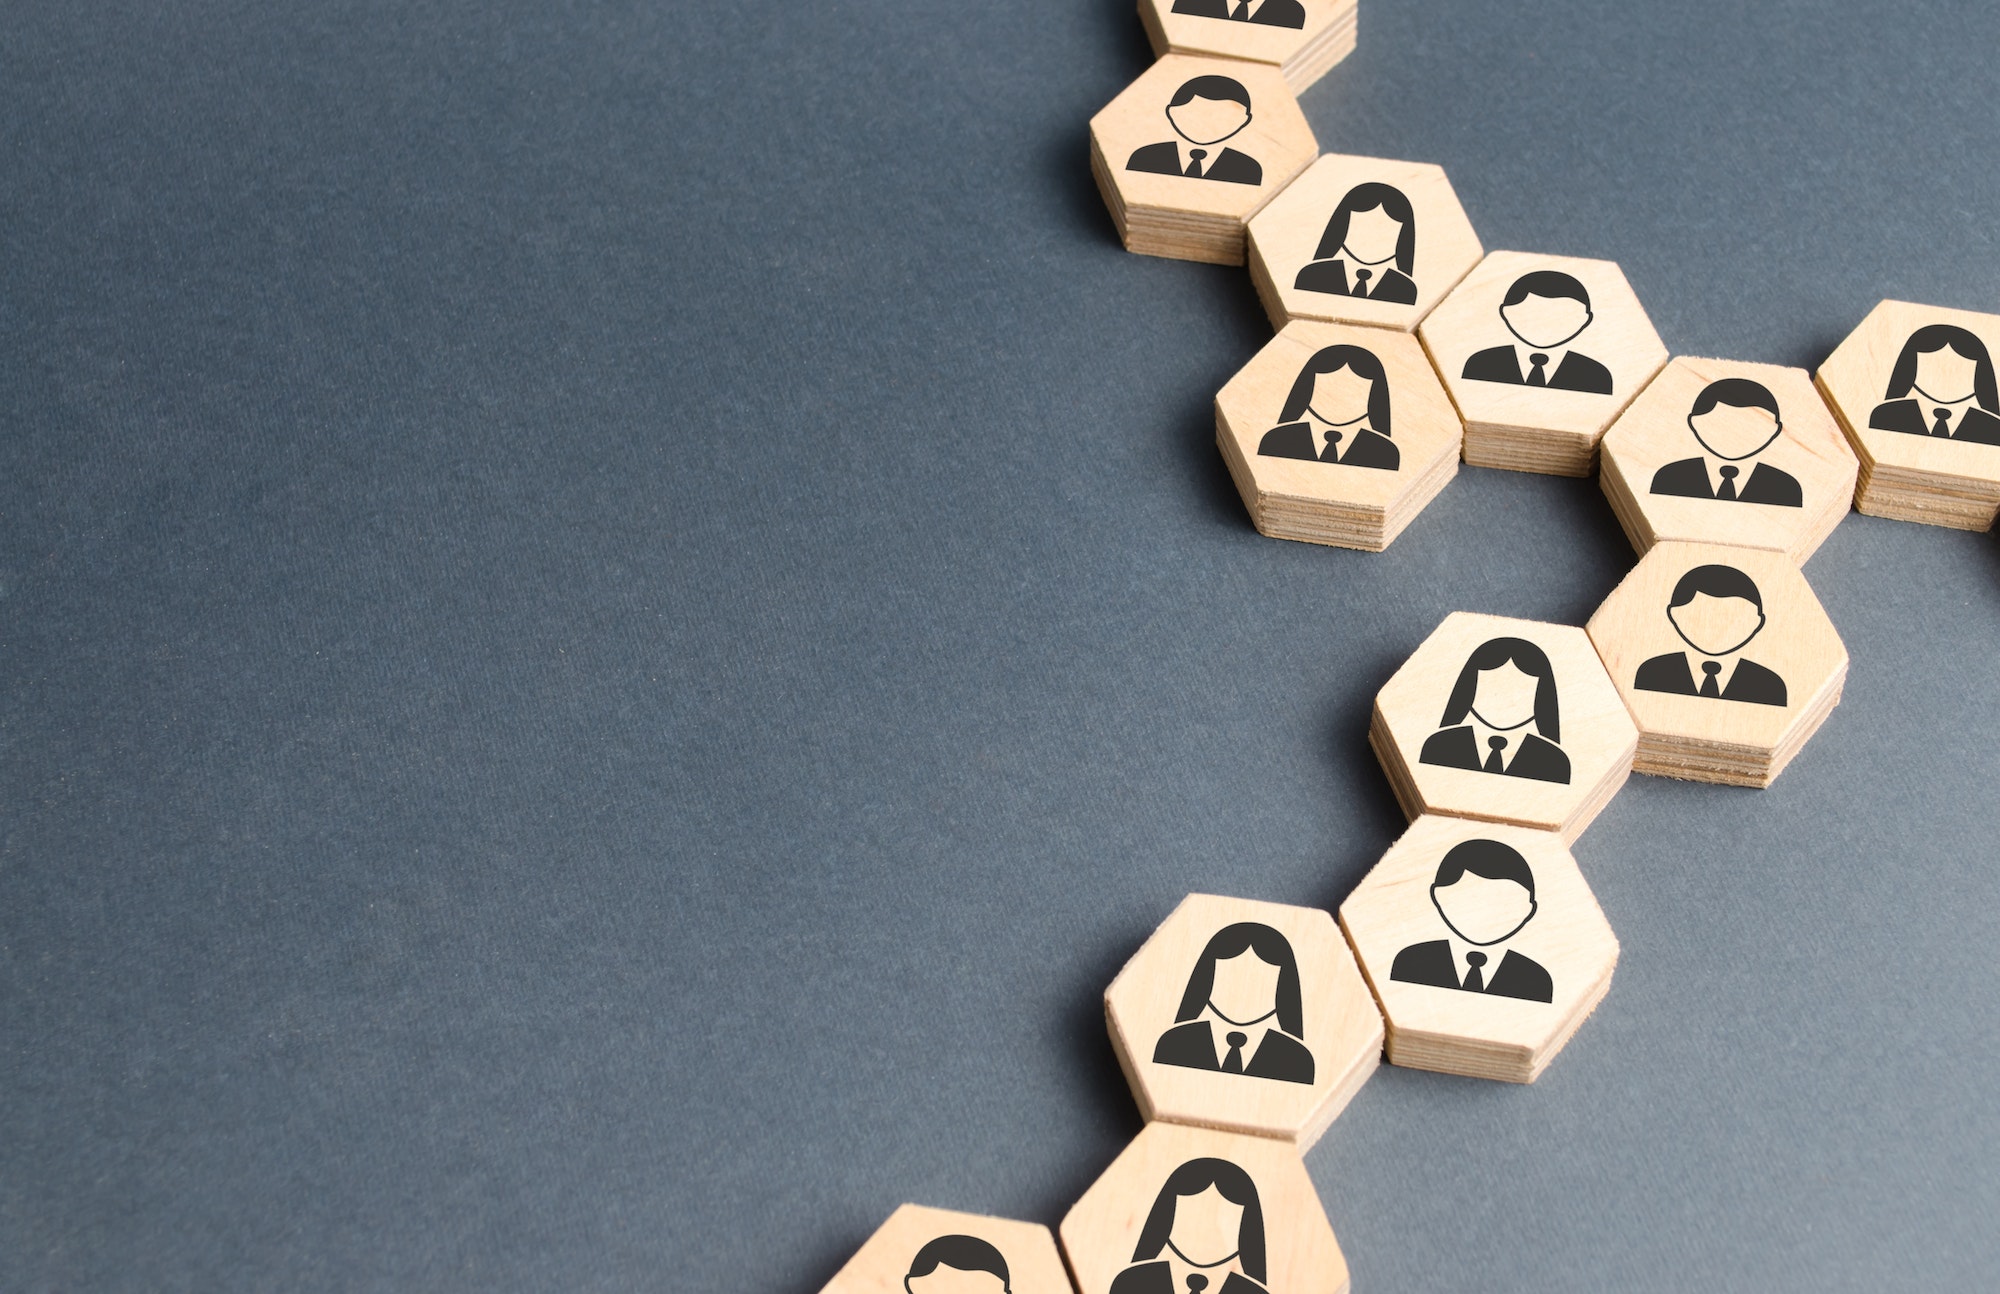 Symbols of employees on the chains of hexagons